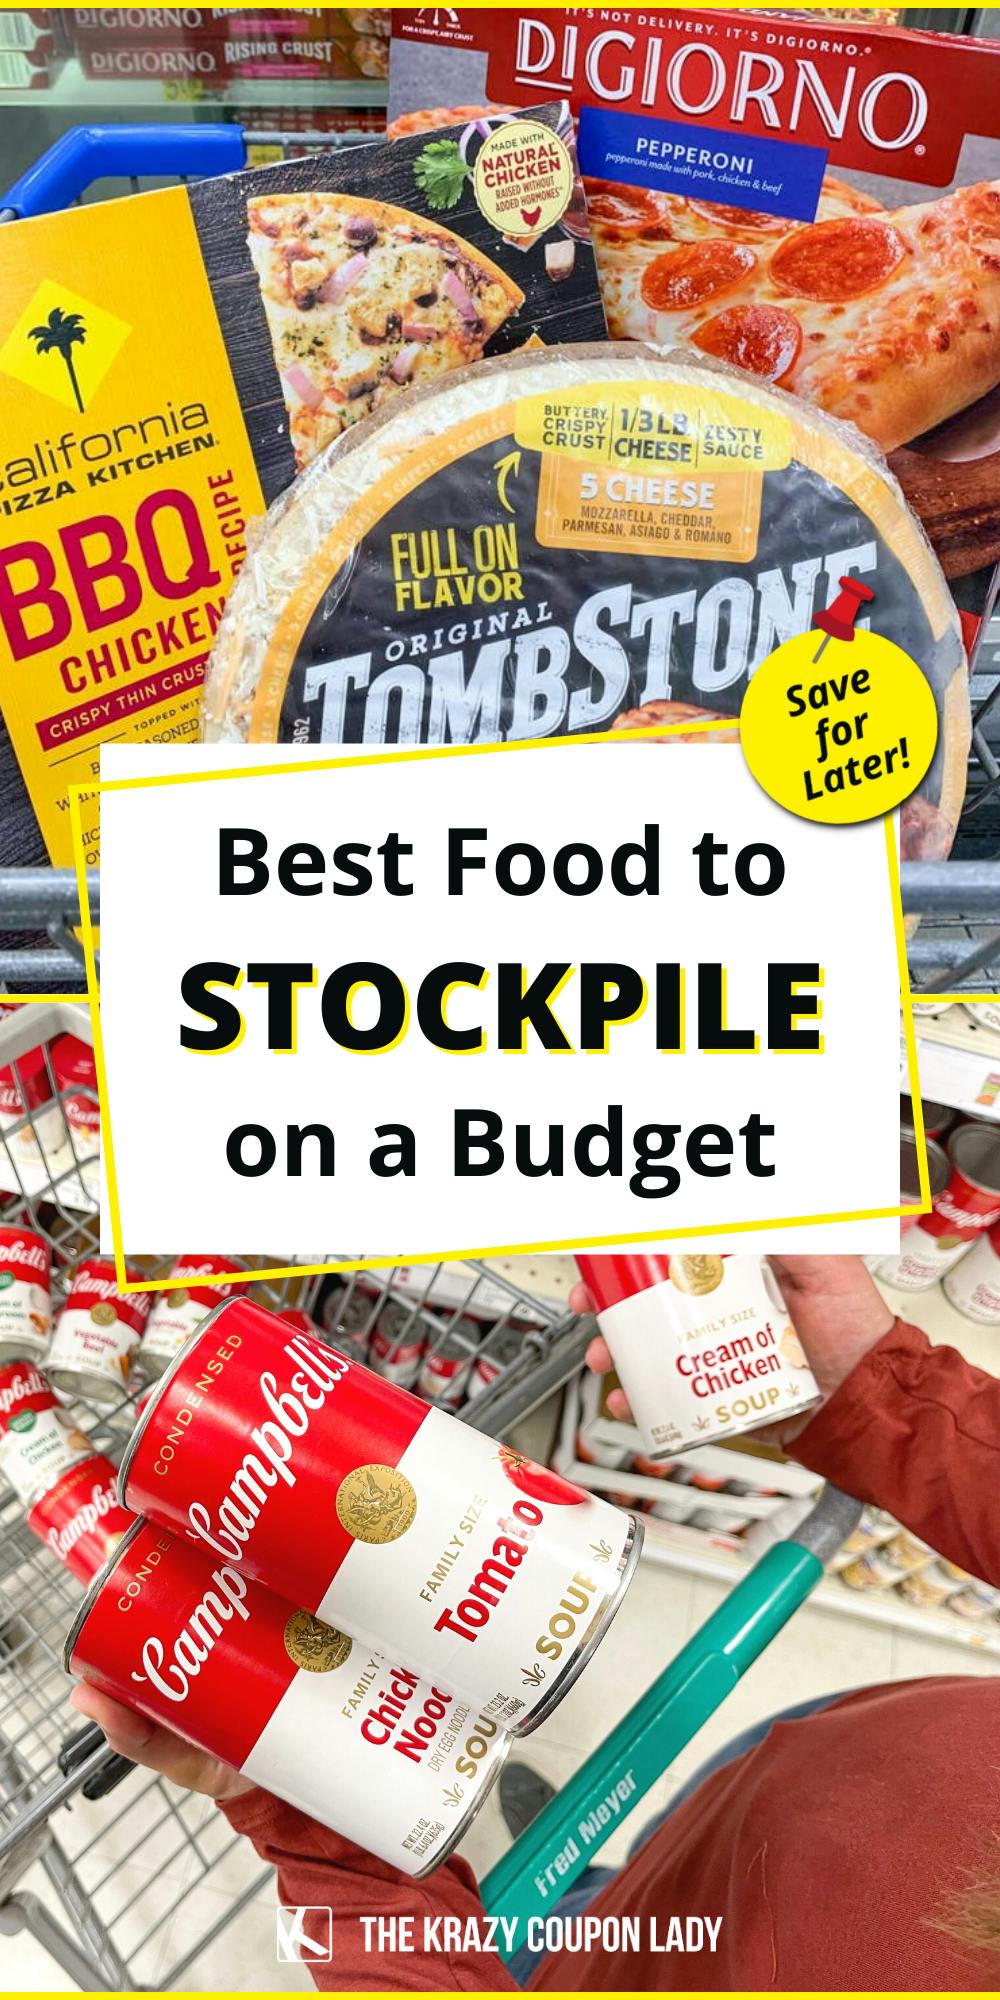 Best Food to Stockpile on a Budget